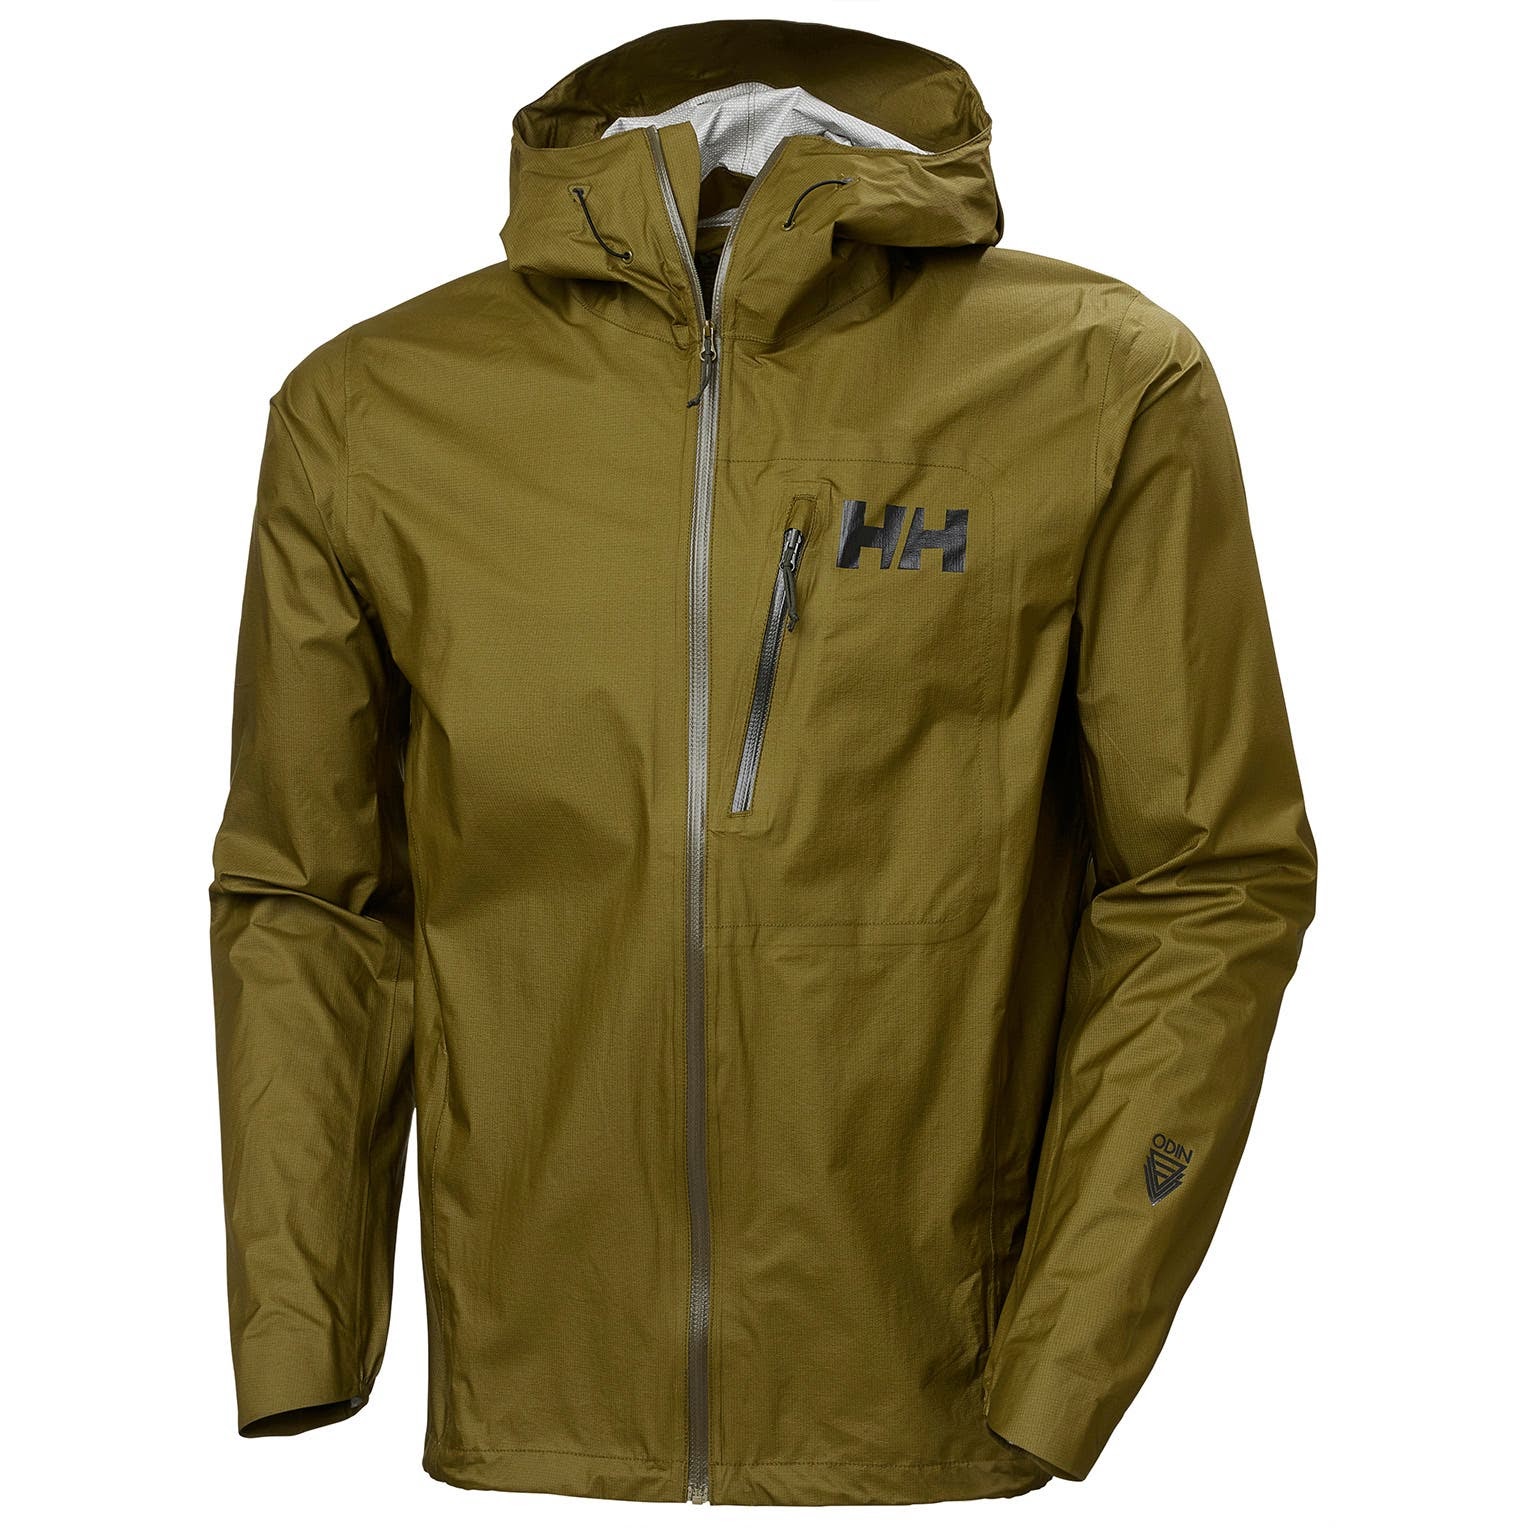 Helly Hansen Odin Minimalist 2.0 Jacket Review - Backpacking Light